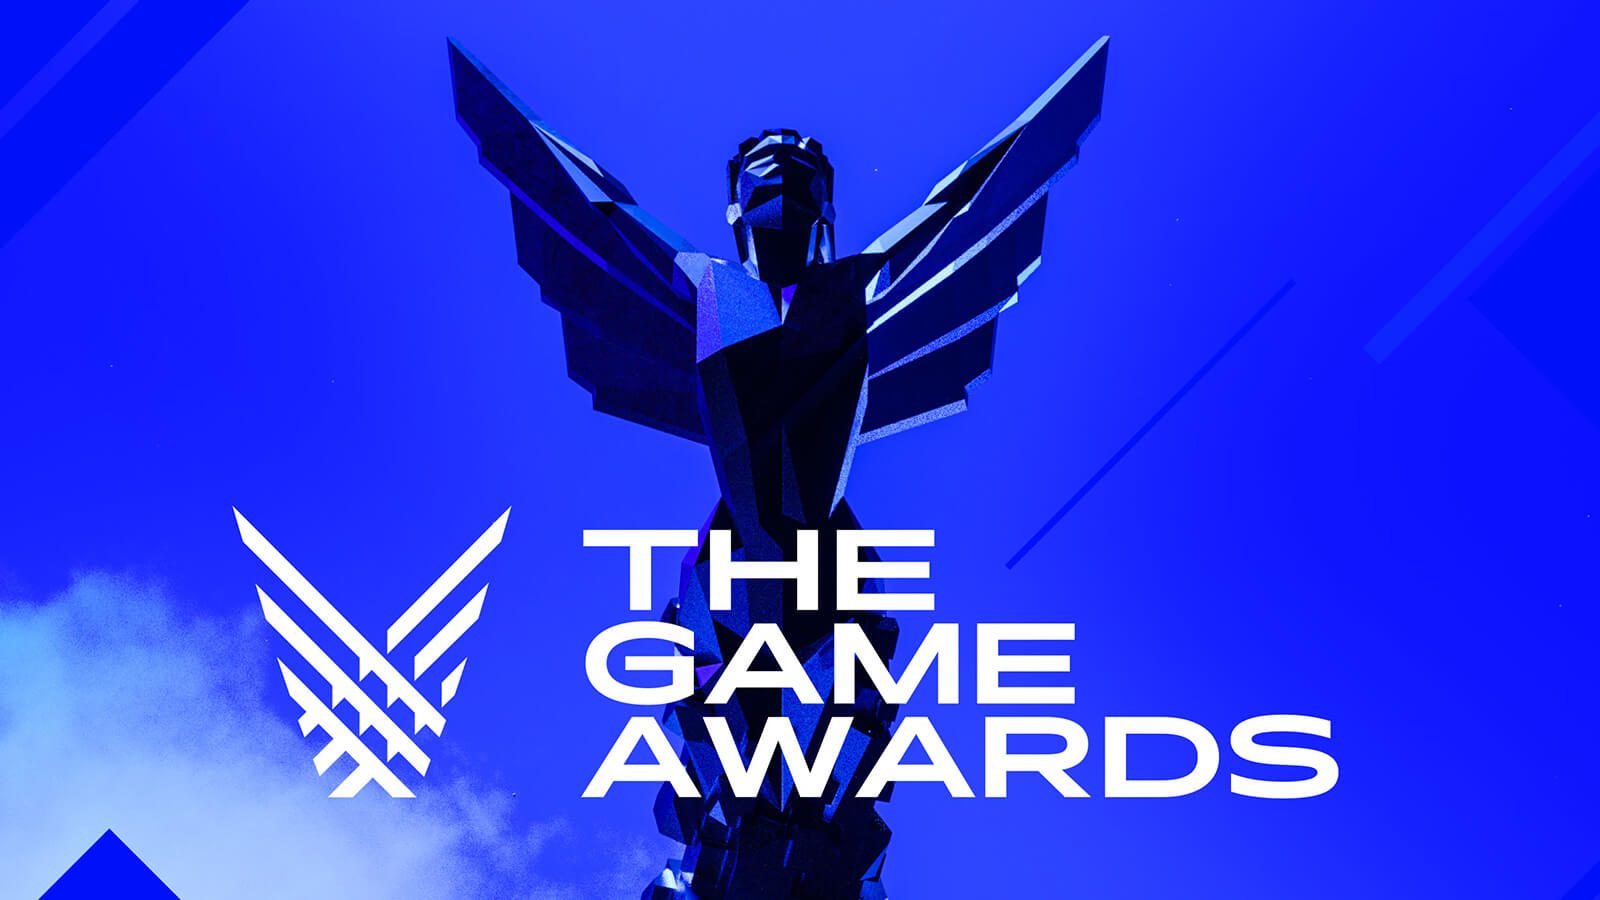 A graphic with a blue background and a Game Awards trophy sitting on a pedestal. The words “The Game Awards December 9” are overlaid in white.